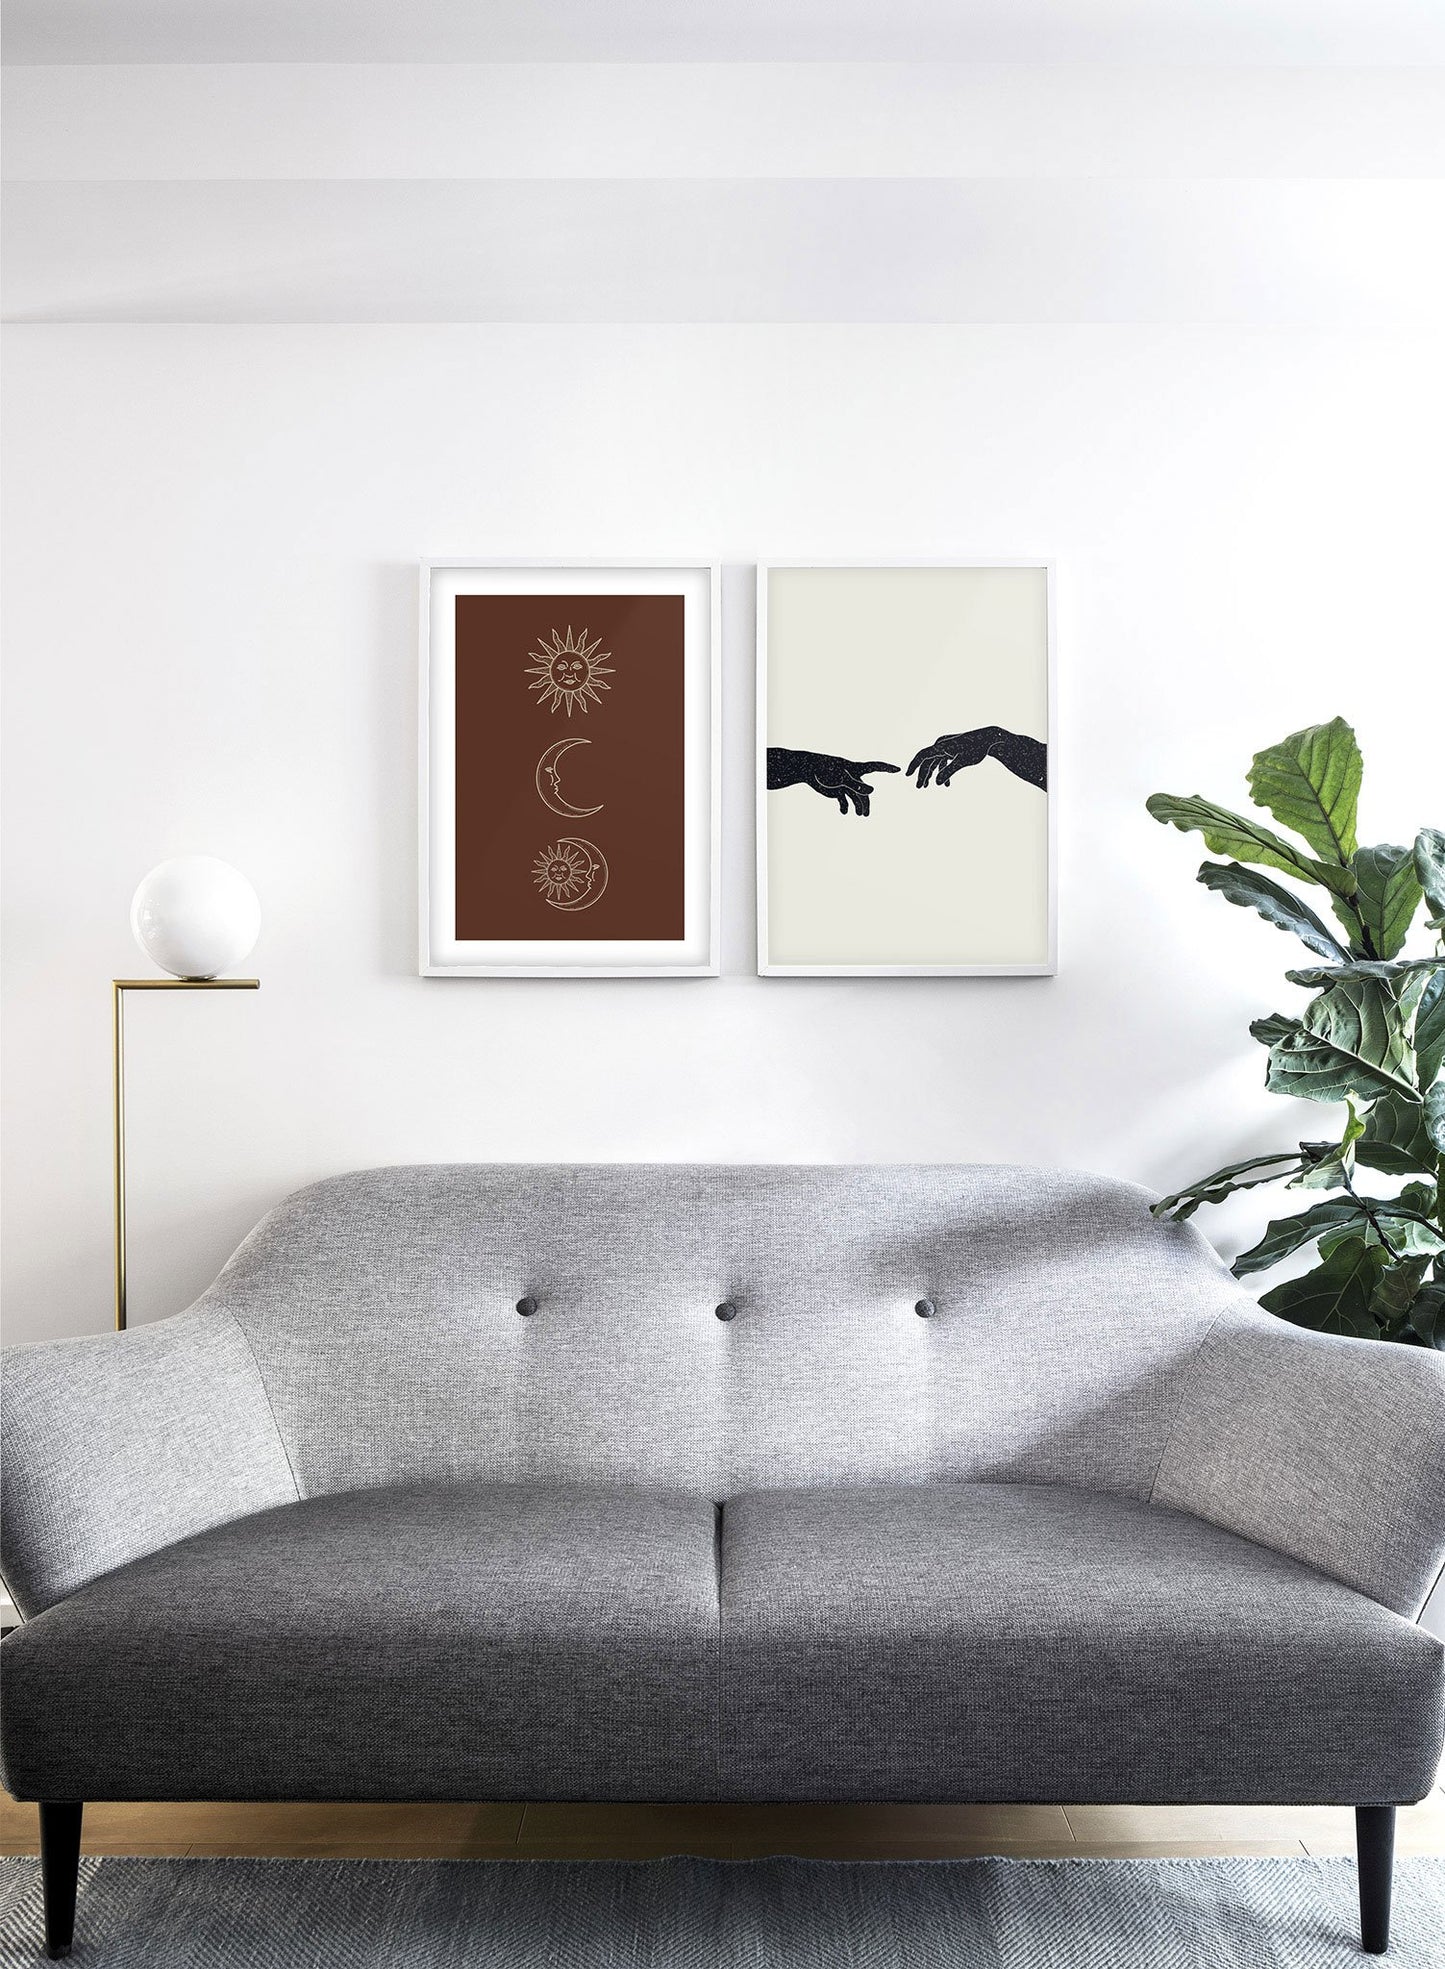 Celestial illustration poster by Opposite Wall with vintage sun and moon - Lifestyle Duo - Living Room